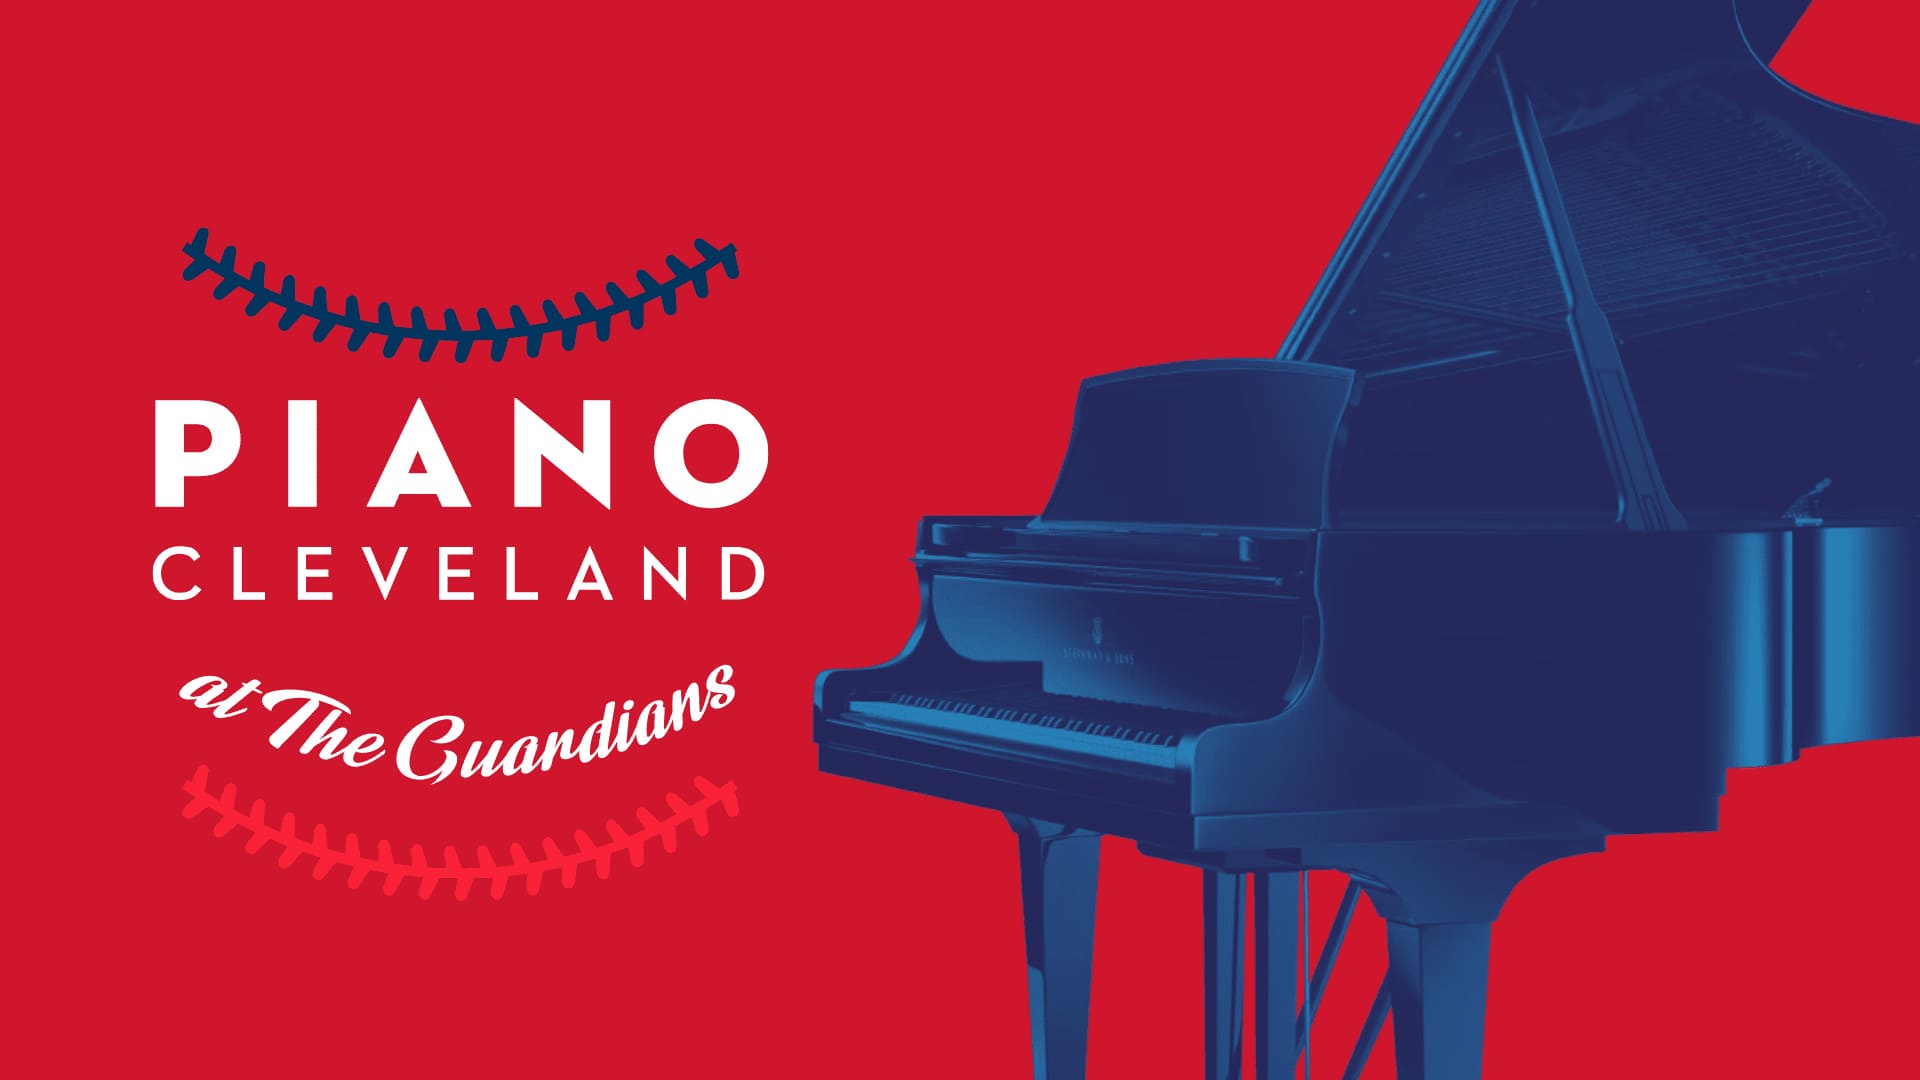 Piano Cleveland at the Guardians